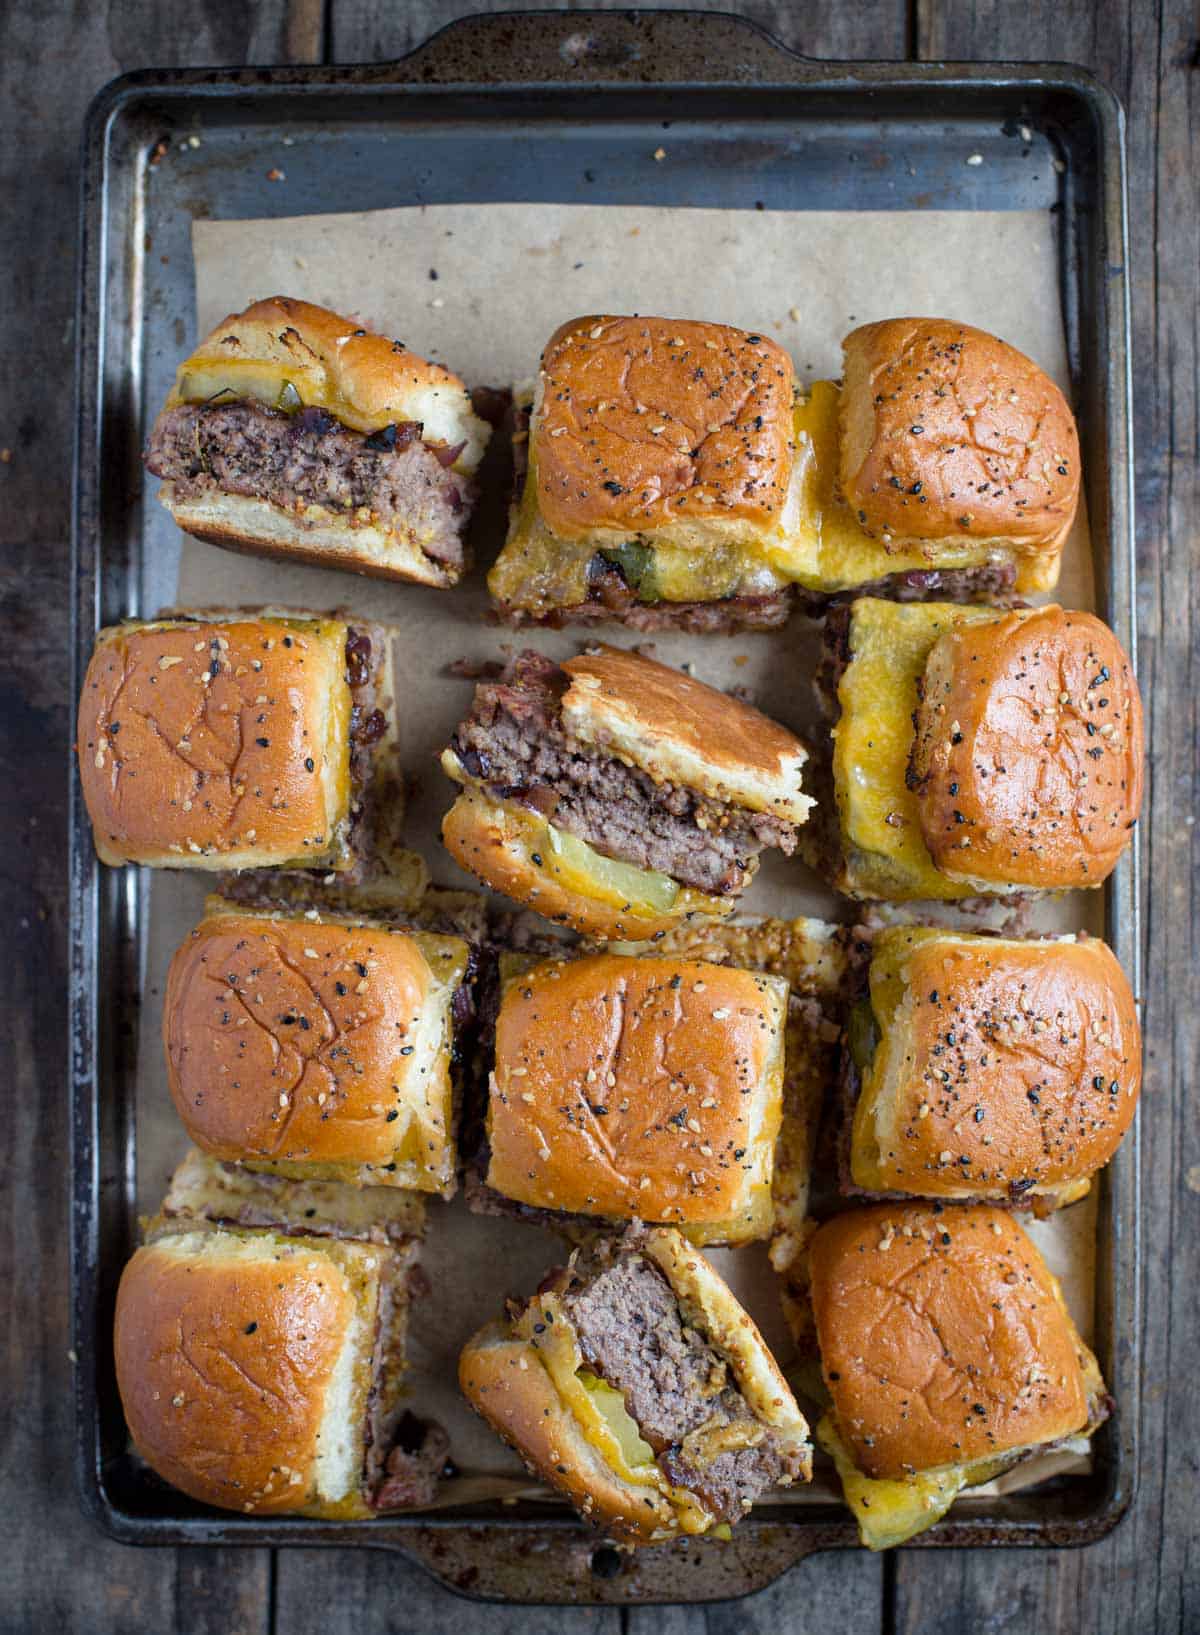 https://www.vindulge.com/wp-content/uploads/2022/06/Grilled-Cheeseburger-Sliders-with-Caramelized-Onions.jpg